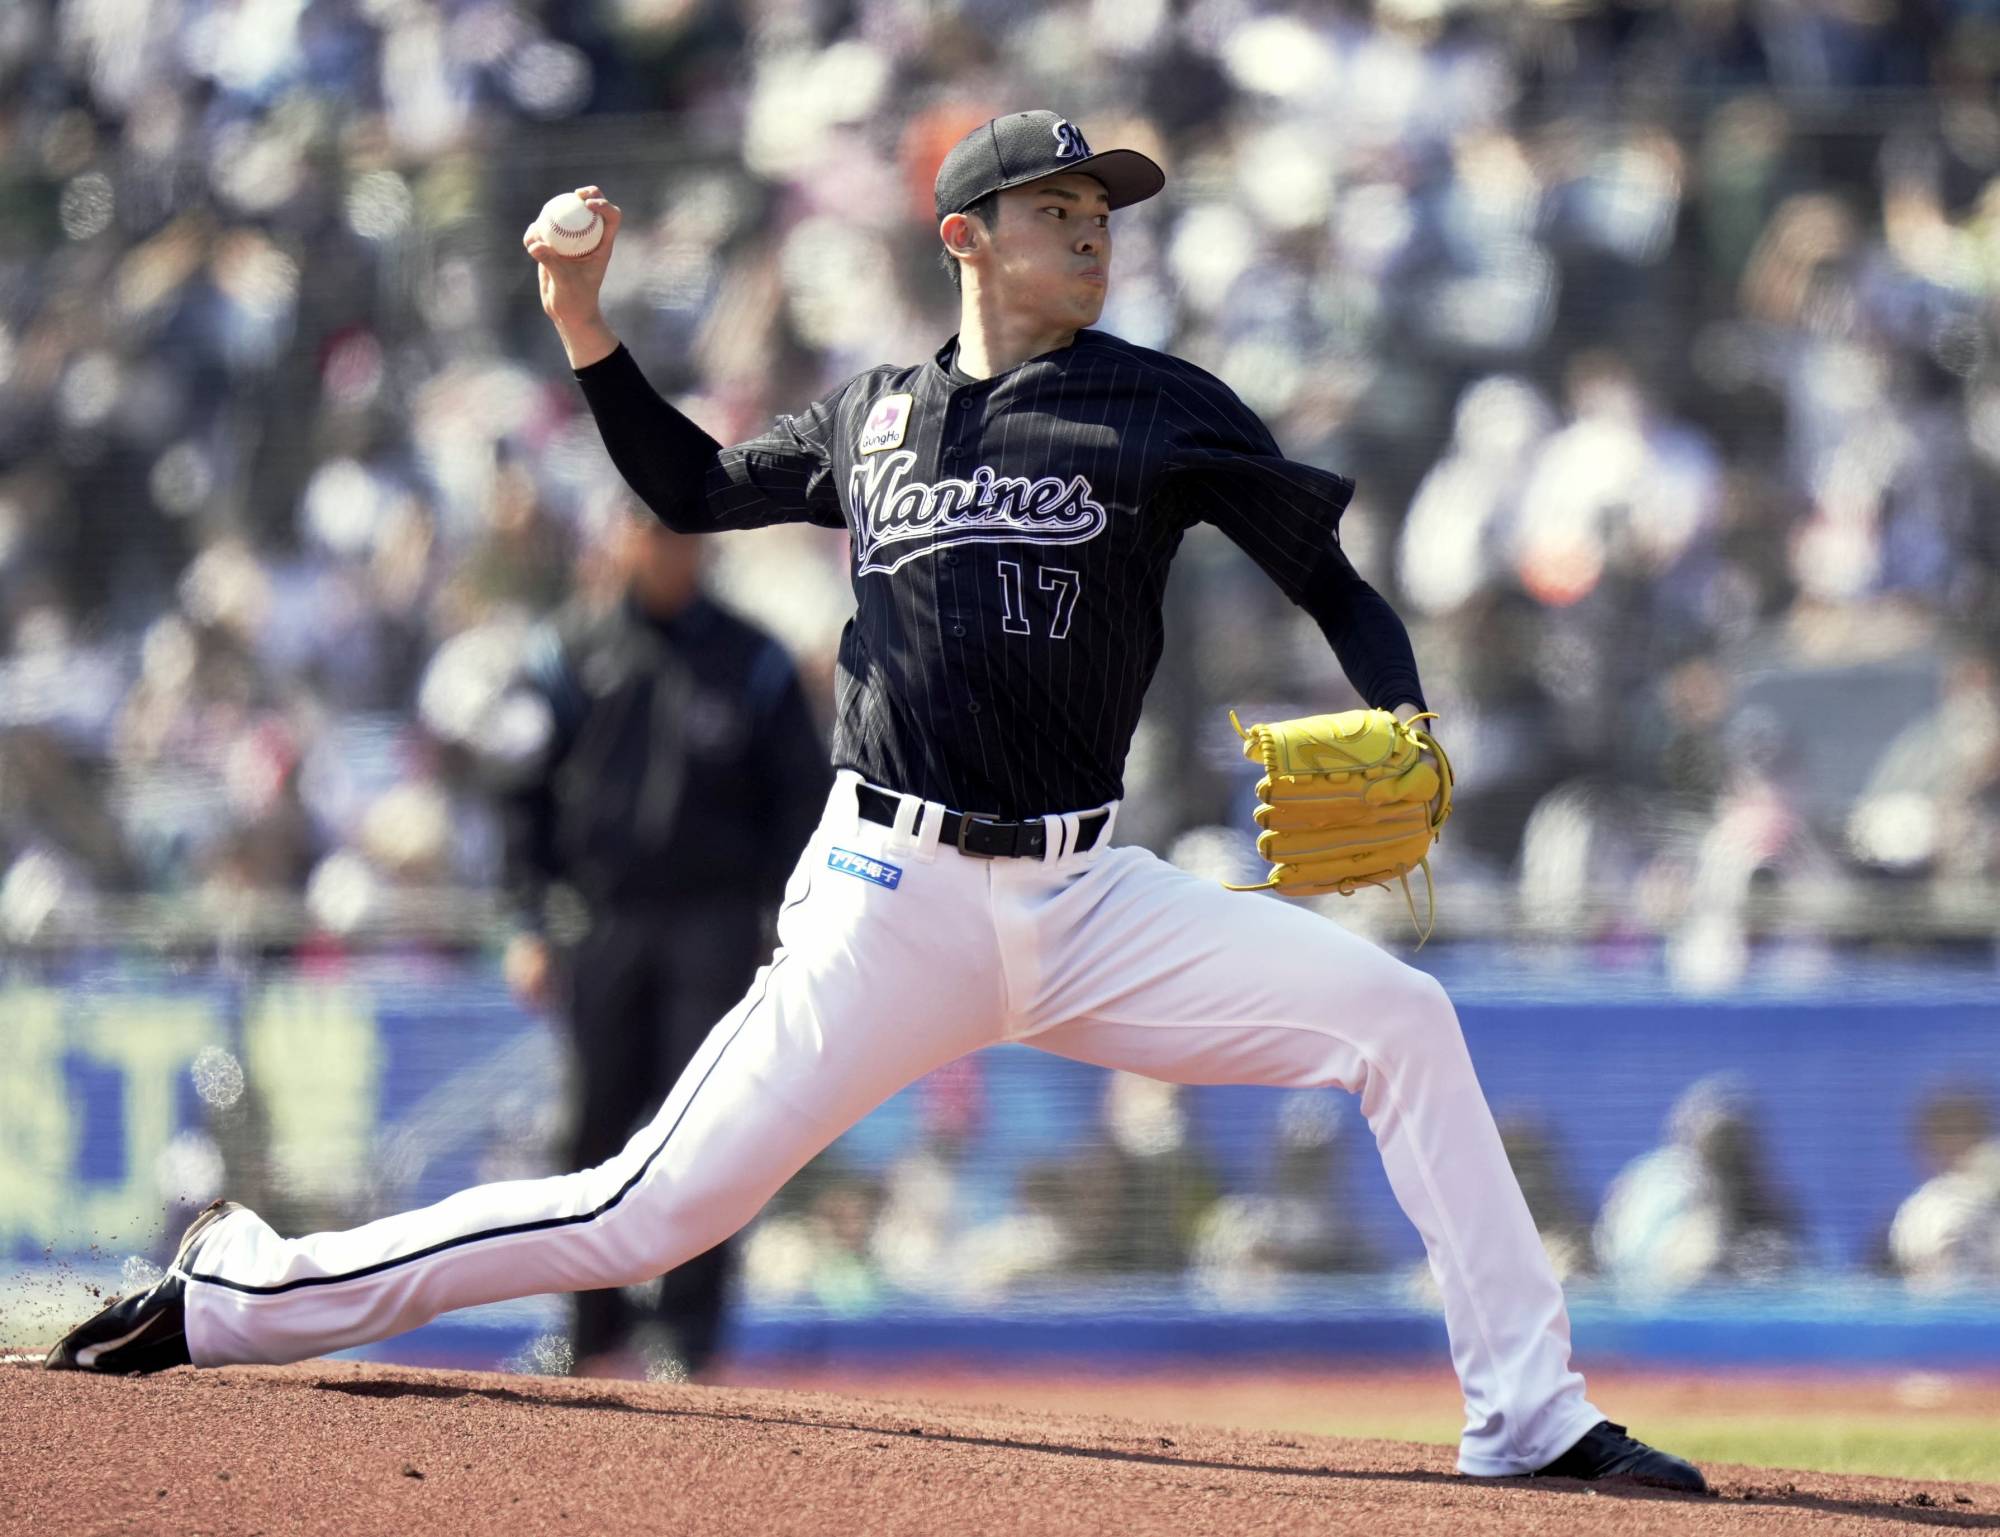 Japanese MLB Players 2022 Recap: Ohtani, Darvish Stand Out